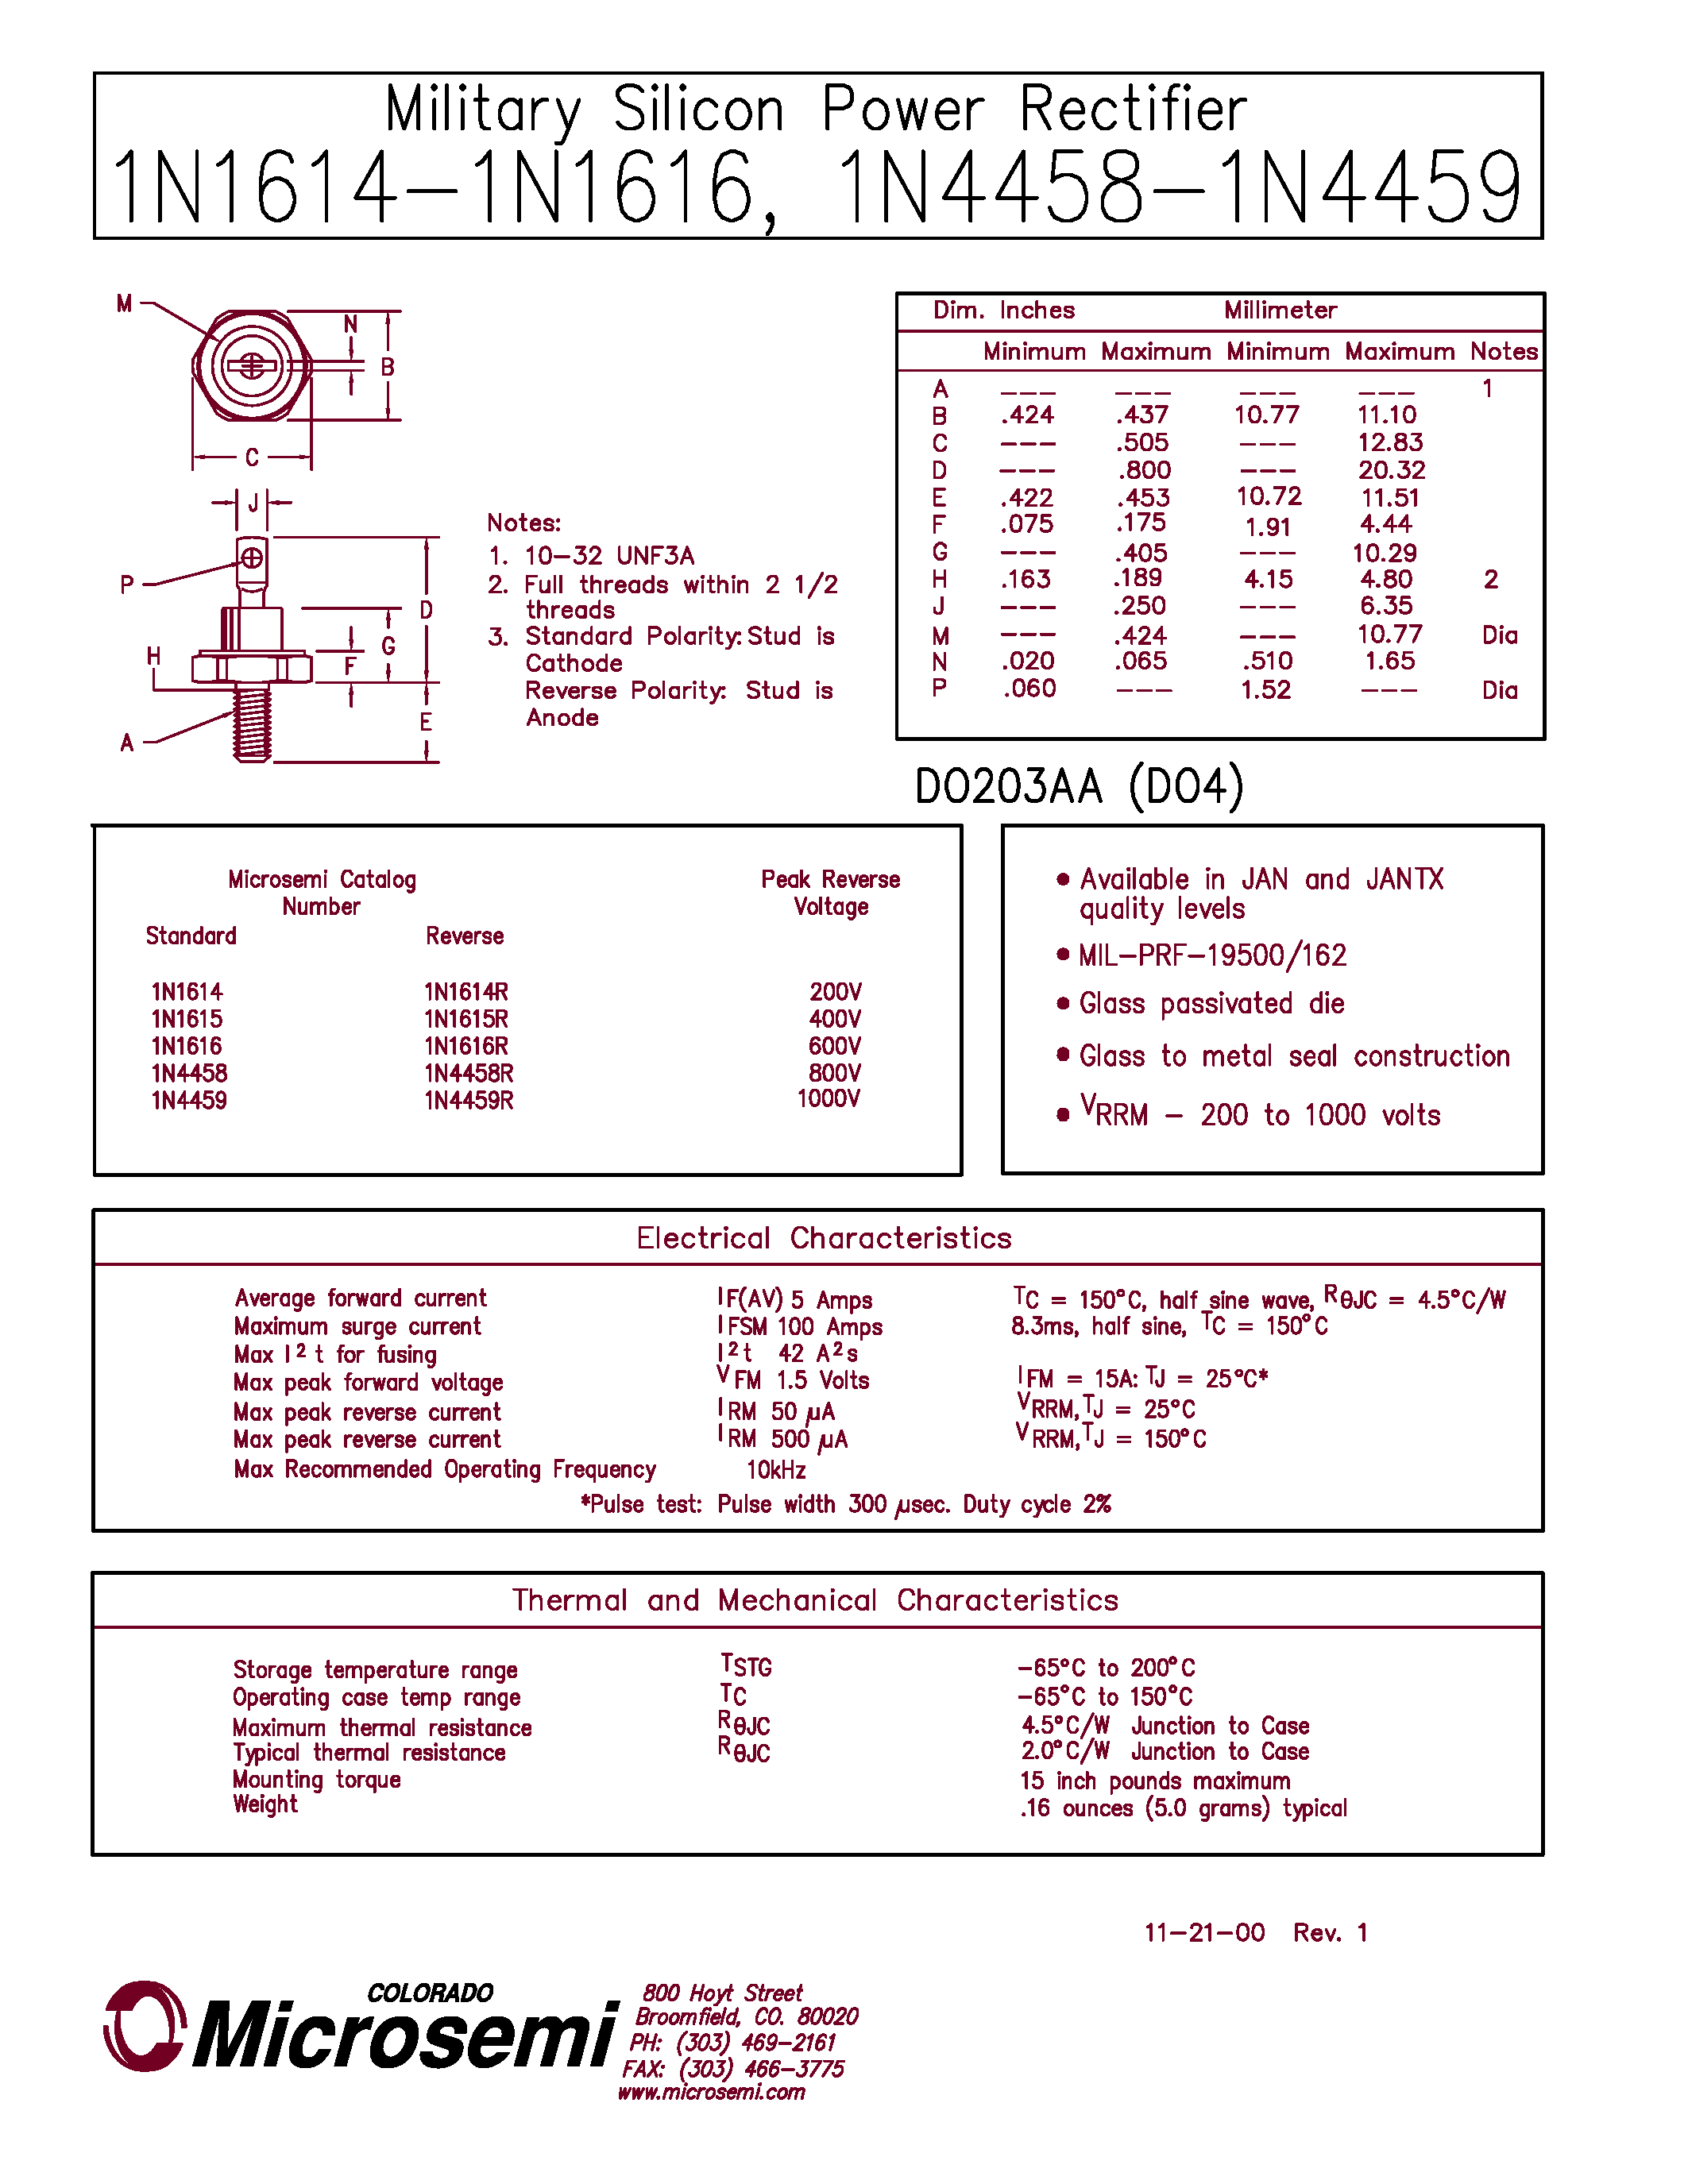 Datasheet 1N1615R - Military Silicon Power Rectifier page 1